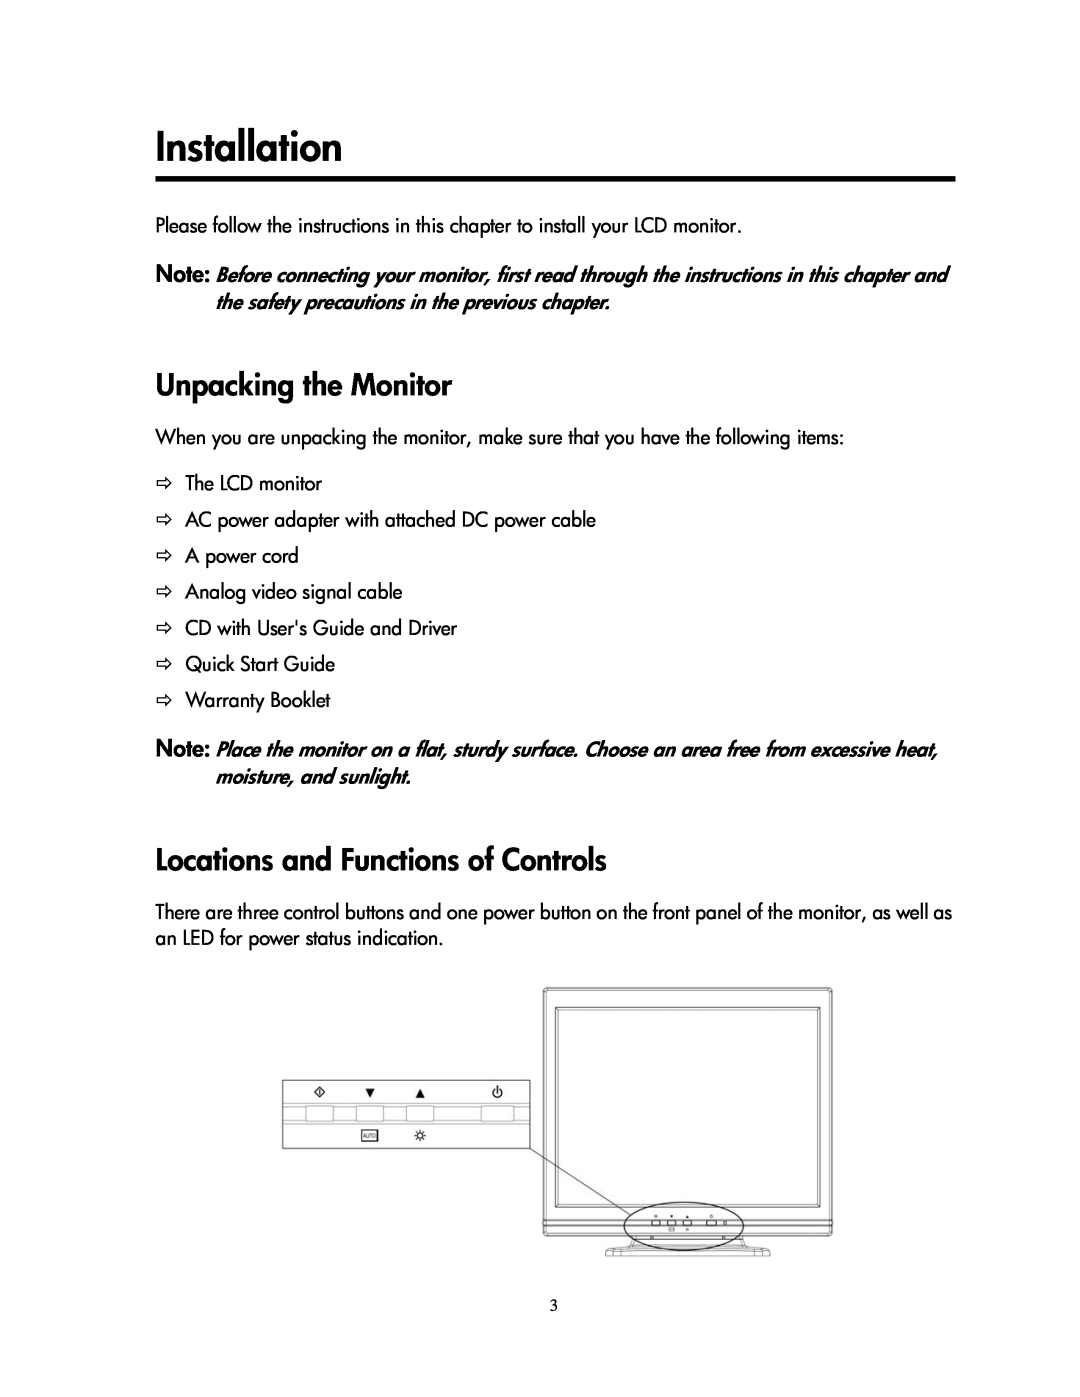 Compaq 1501 manual Installation, Unpacking the Monitor, Locations and Functions of Controls 